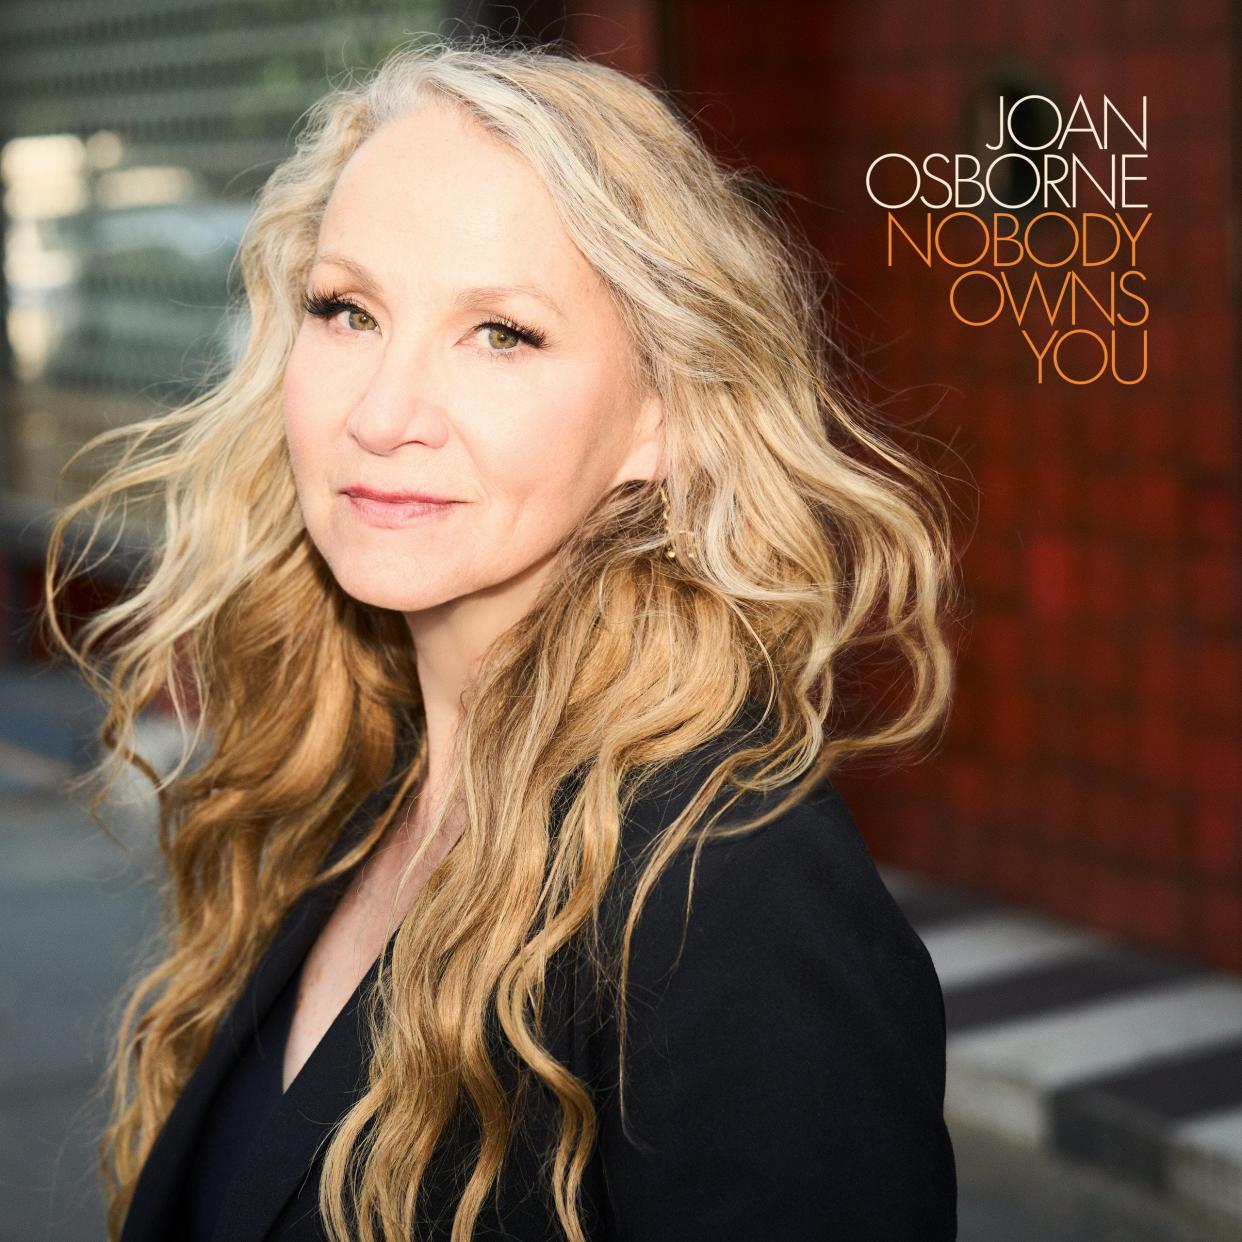 Joan Osborne will be performing at the first-ever Sleepy Hollow Music Festival June 8.